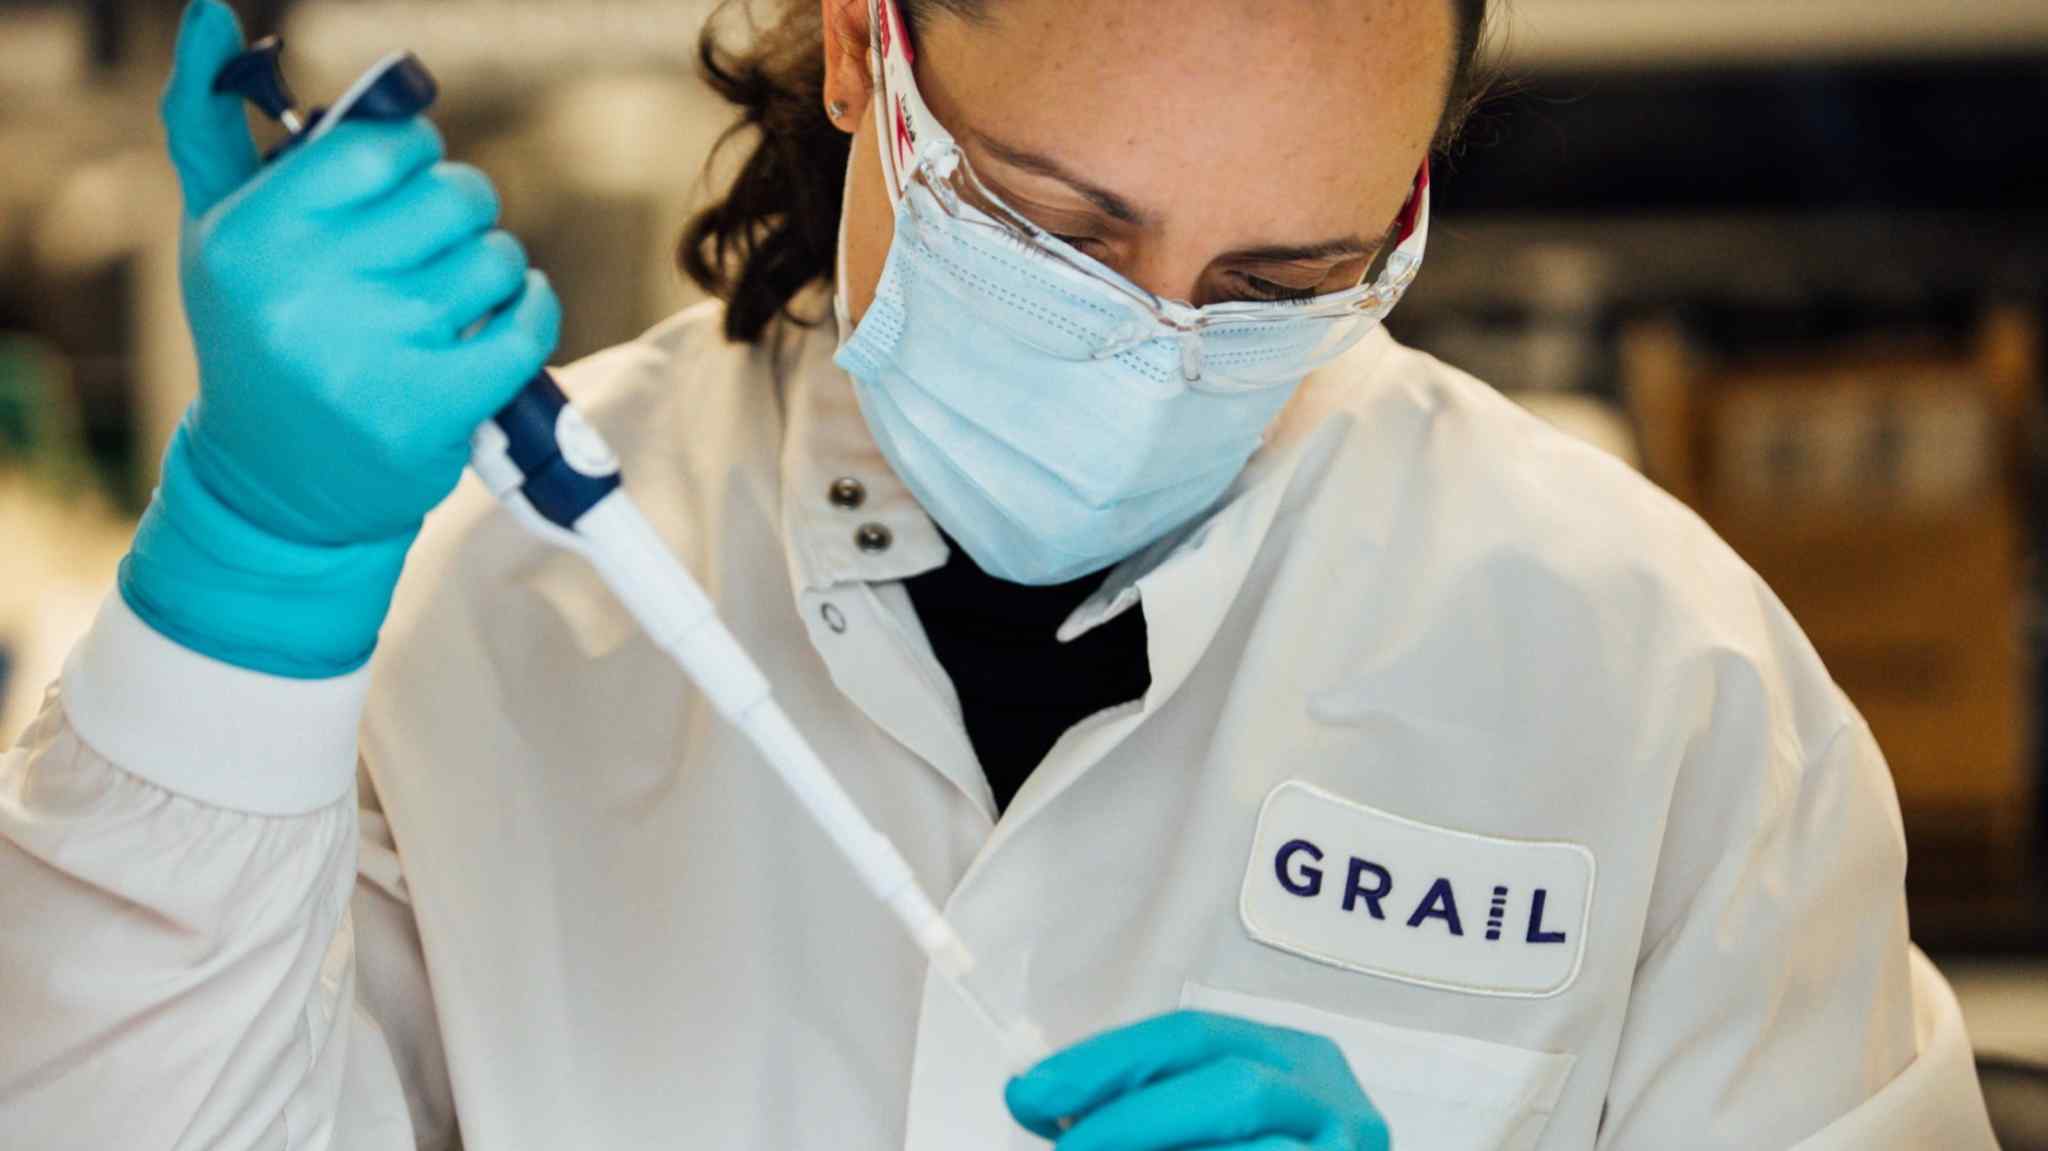 More than 400 Grail patients incorrectly told they may have cancer